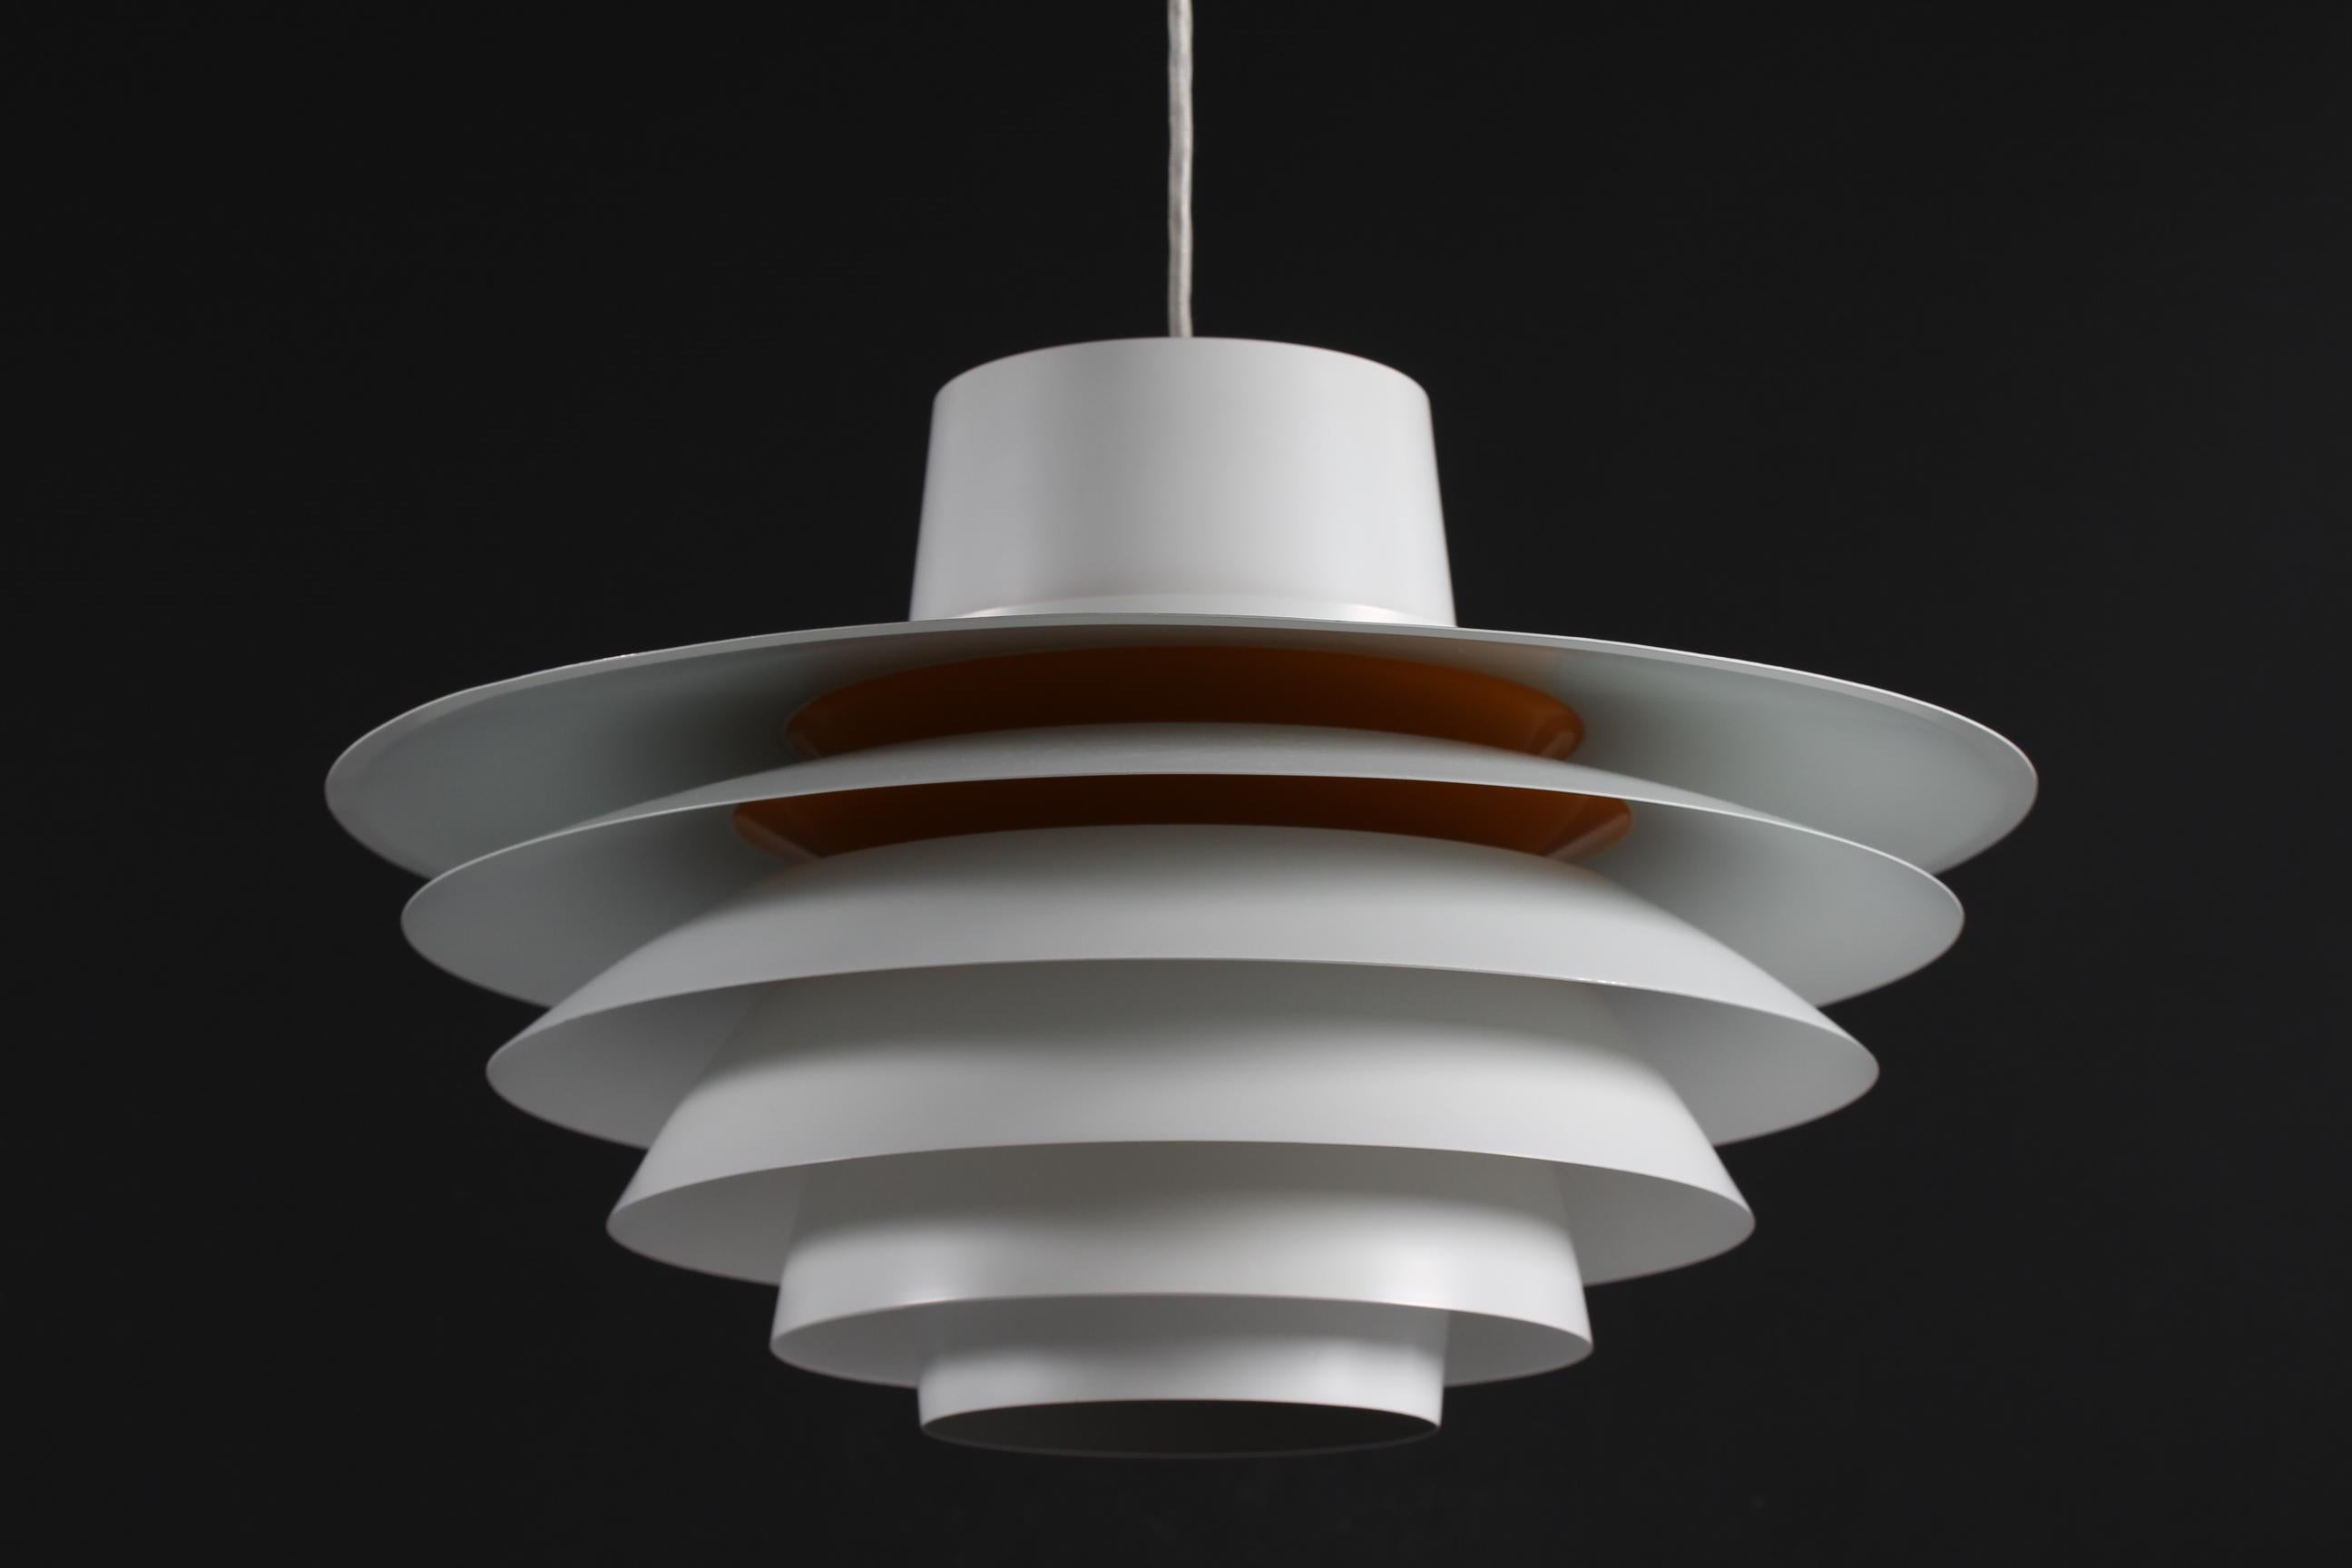 Danish Verona ceiling lamp/pendent light designed by Svend Middelboe in 1978 and manufactured by Nordisk Solar in the 1980s
This is a rare version pendant made of metal with white and yellow lacquer. The inside core is yellow which is hard to